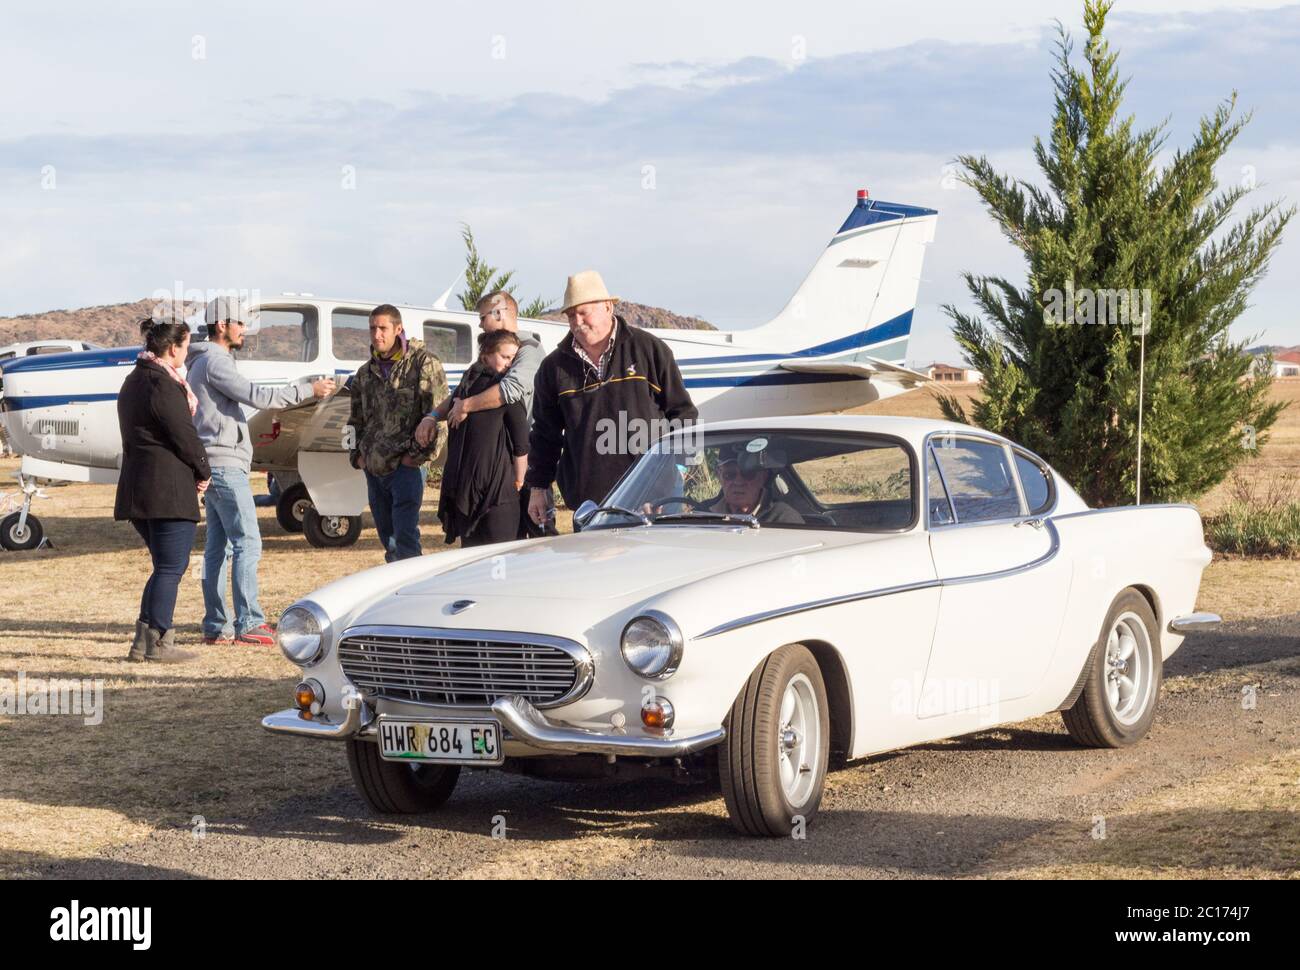 QUEENSTOWN, SOUTH AFRICA - 17 June 2017: Vintage Volvo P1800 car being driven as part of a display a Stock Photo